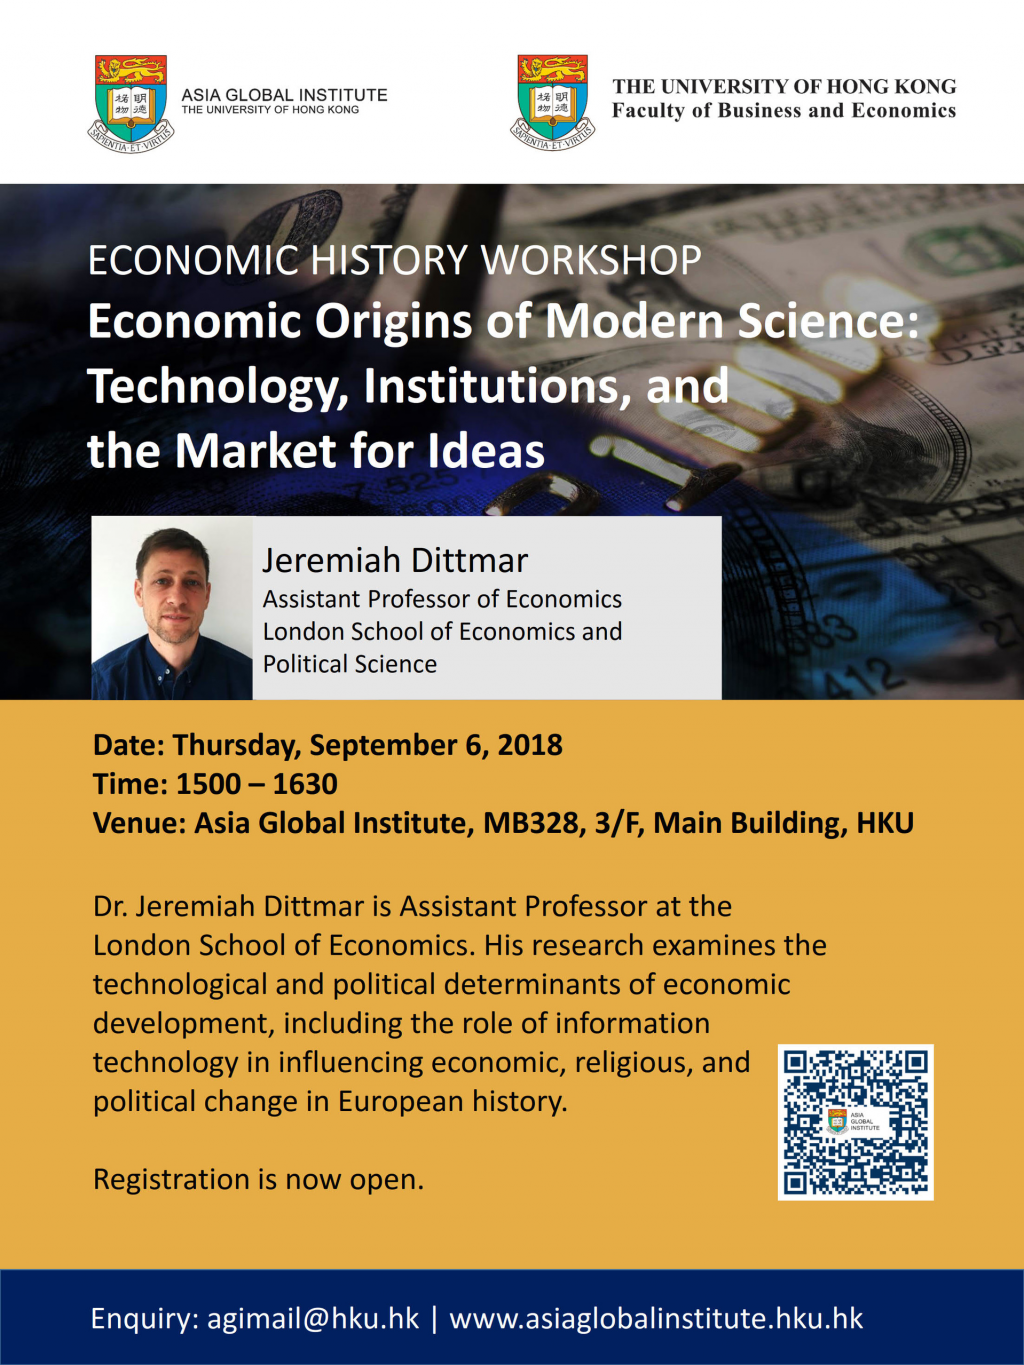 Economic History Workshop - Economic Origins of Modern Science: Technology, Institutions, and the Market for Ideas